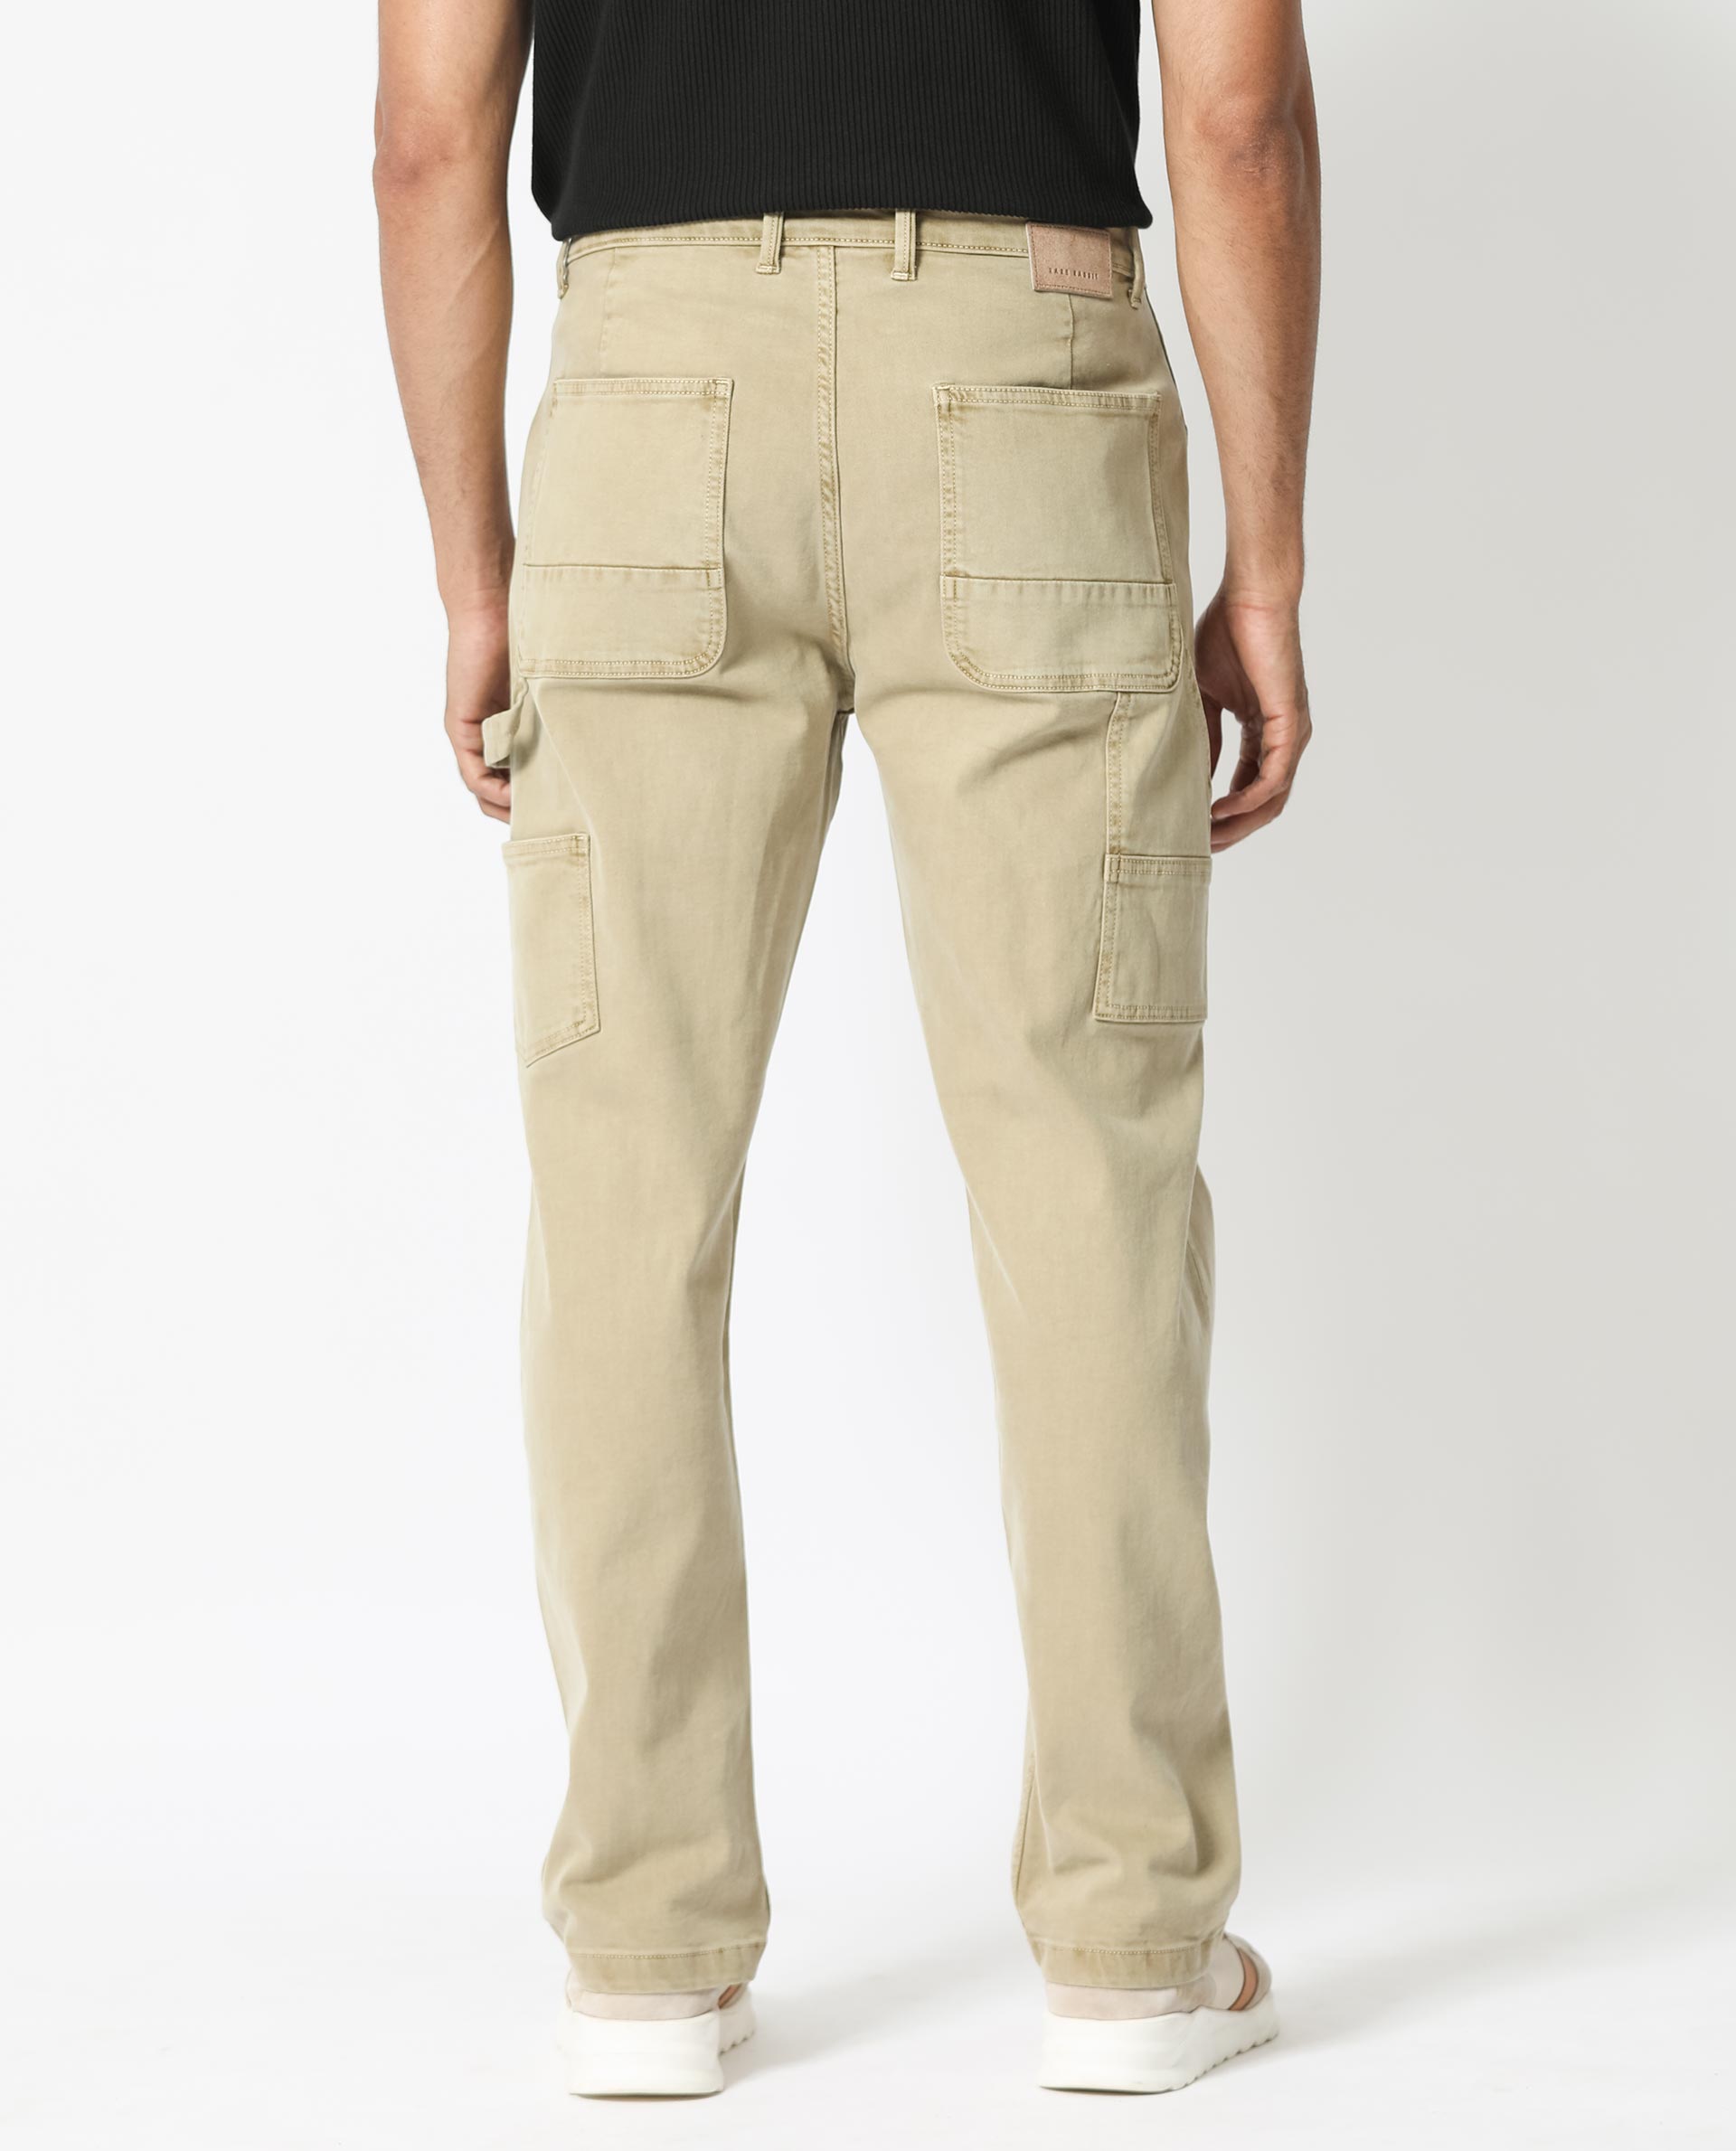 Buy Wrangler Authentics Men's Relaxed Fit Stretch Cargo Pant, Kangaroo, 38W  x 32L at Amazon.in